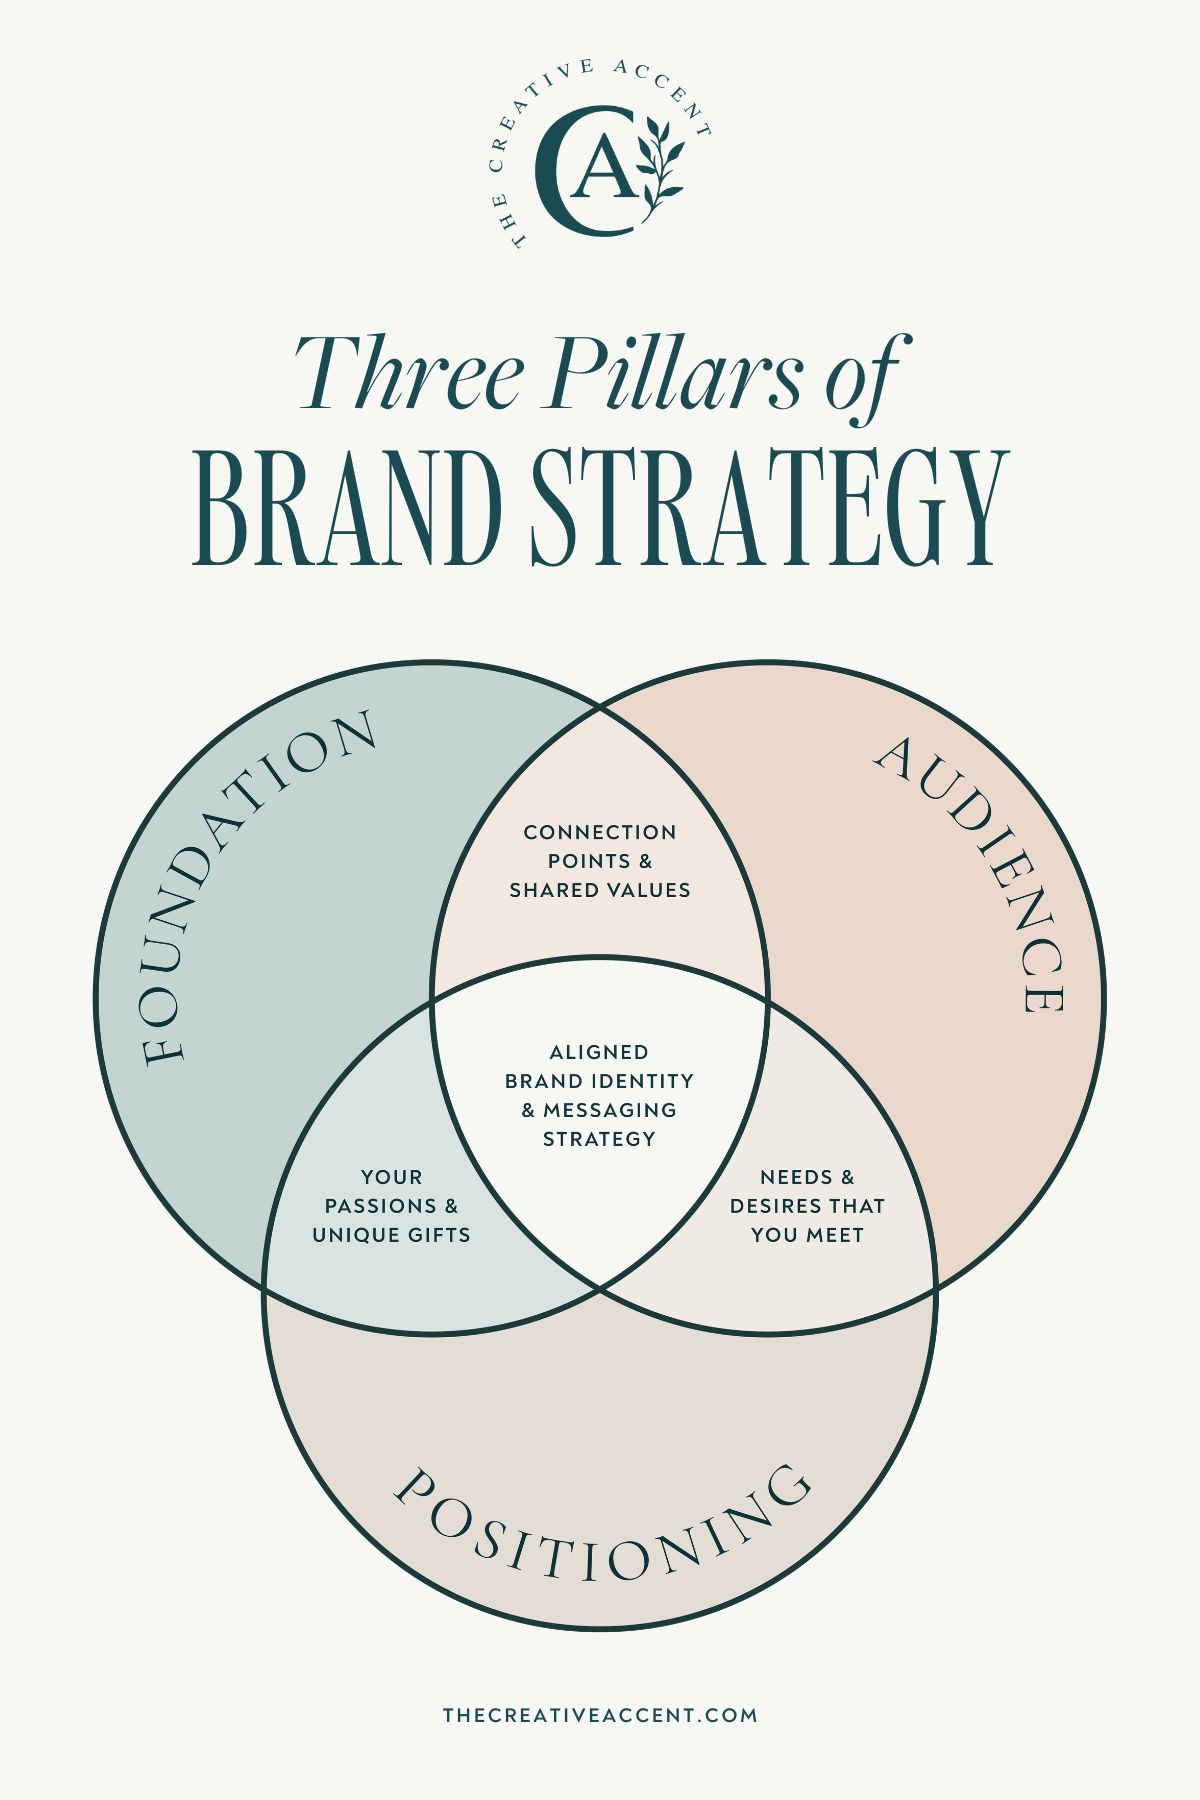 The three pillars of brand strategy you need to know before your diy logo design process begins.